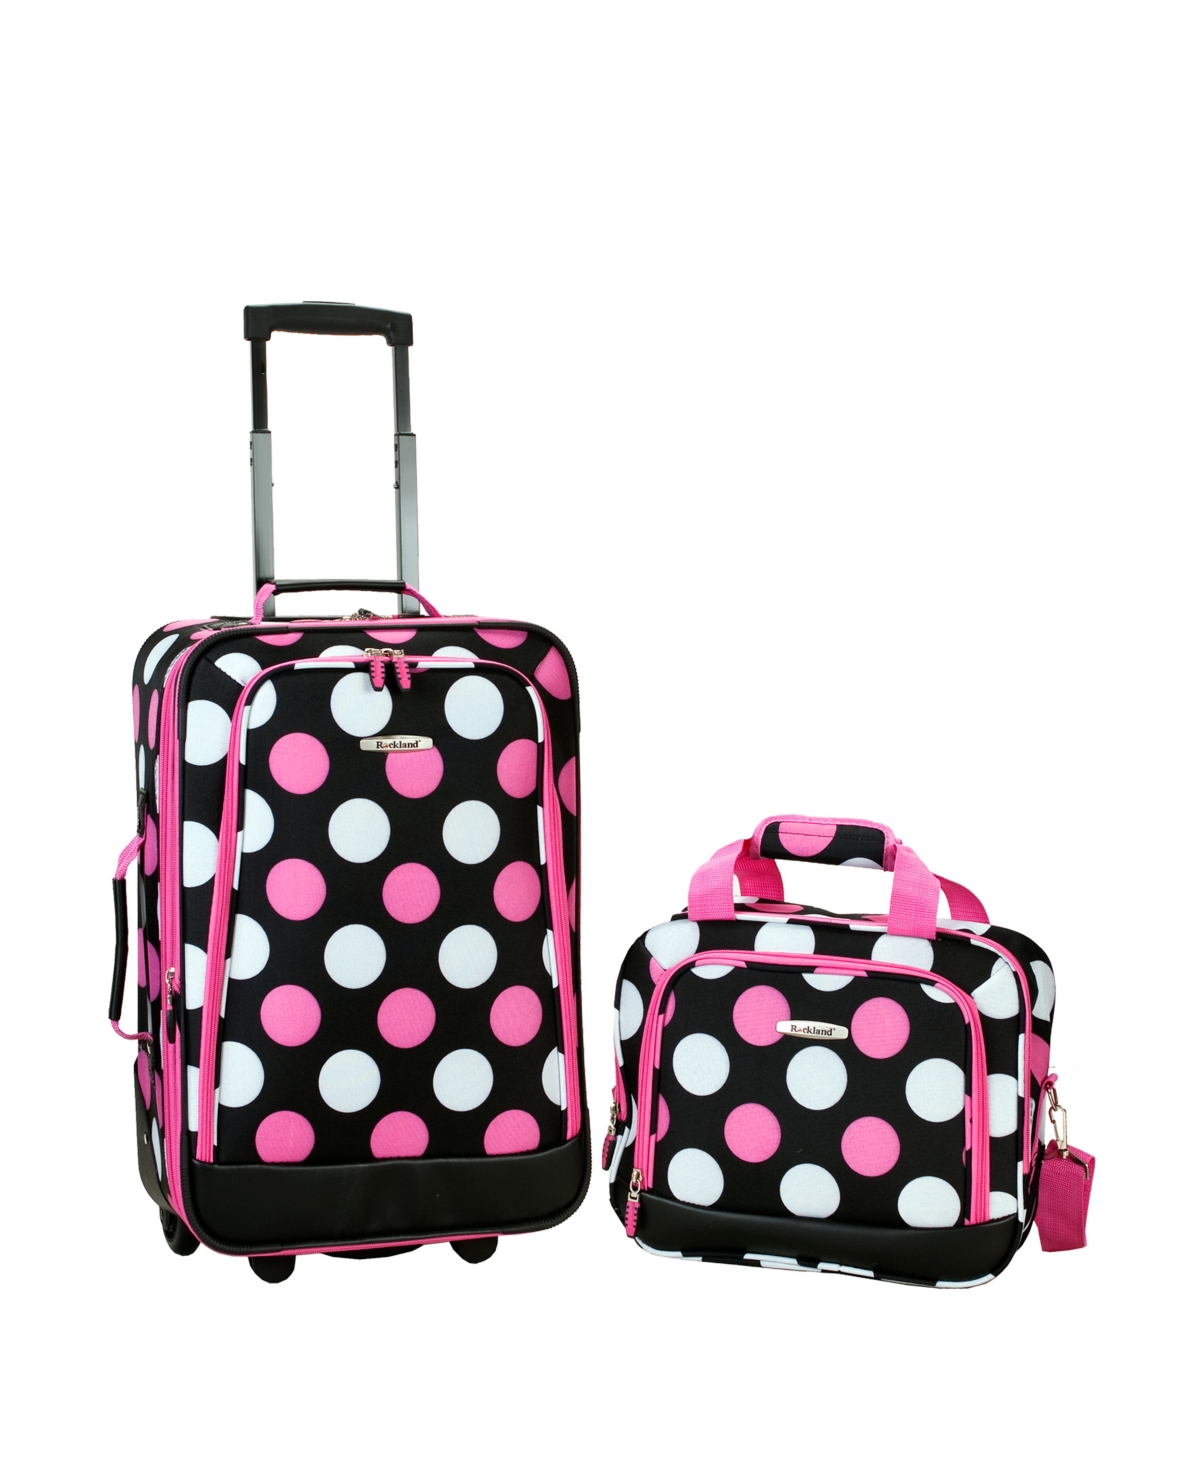 Rockland 2-pc. Pattern Softside Luggage Set In Pink  White Dots On Black